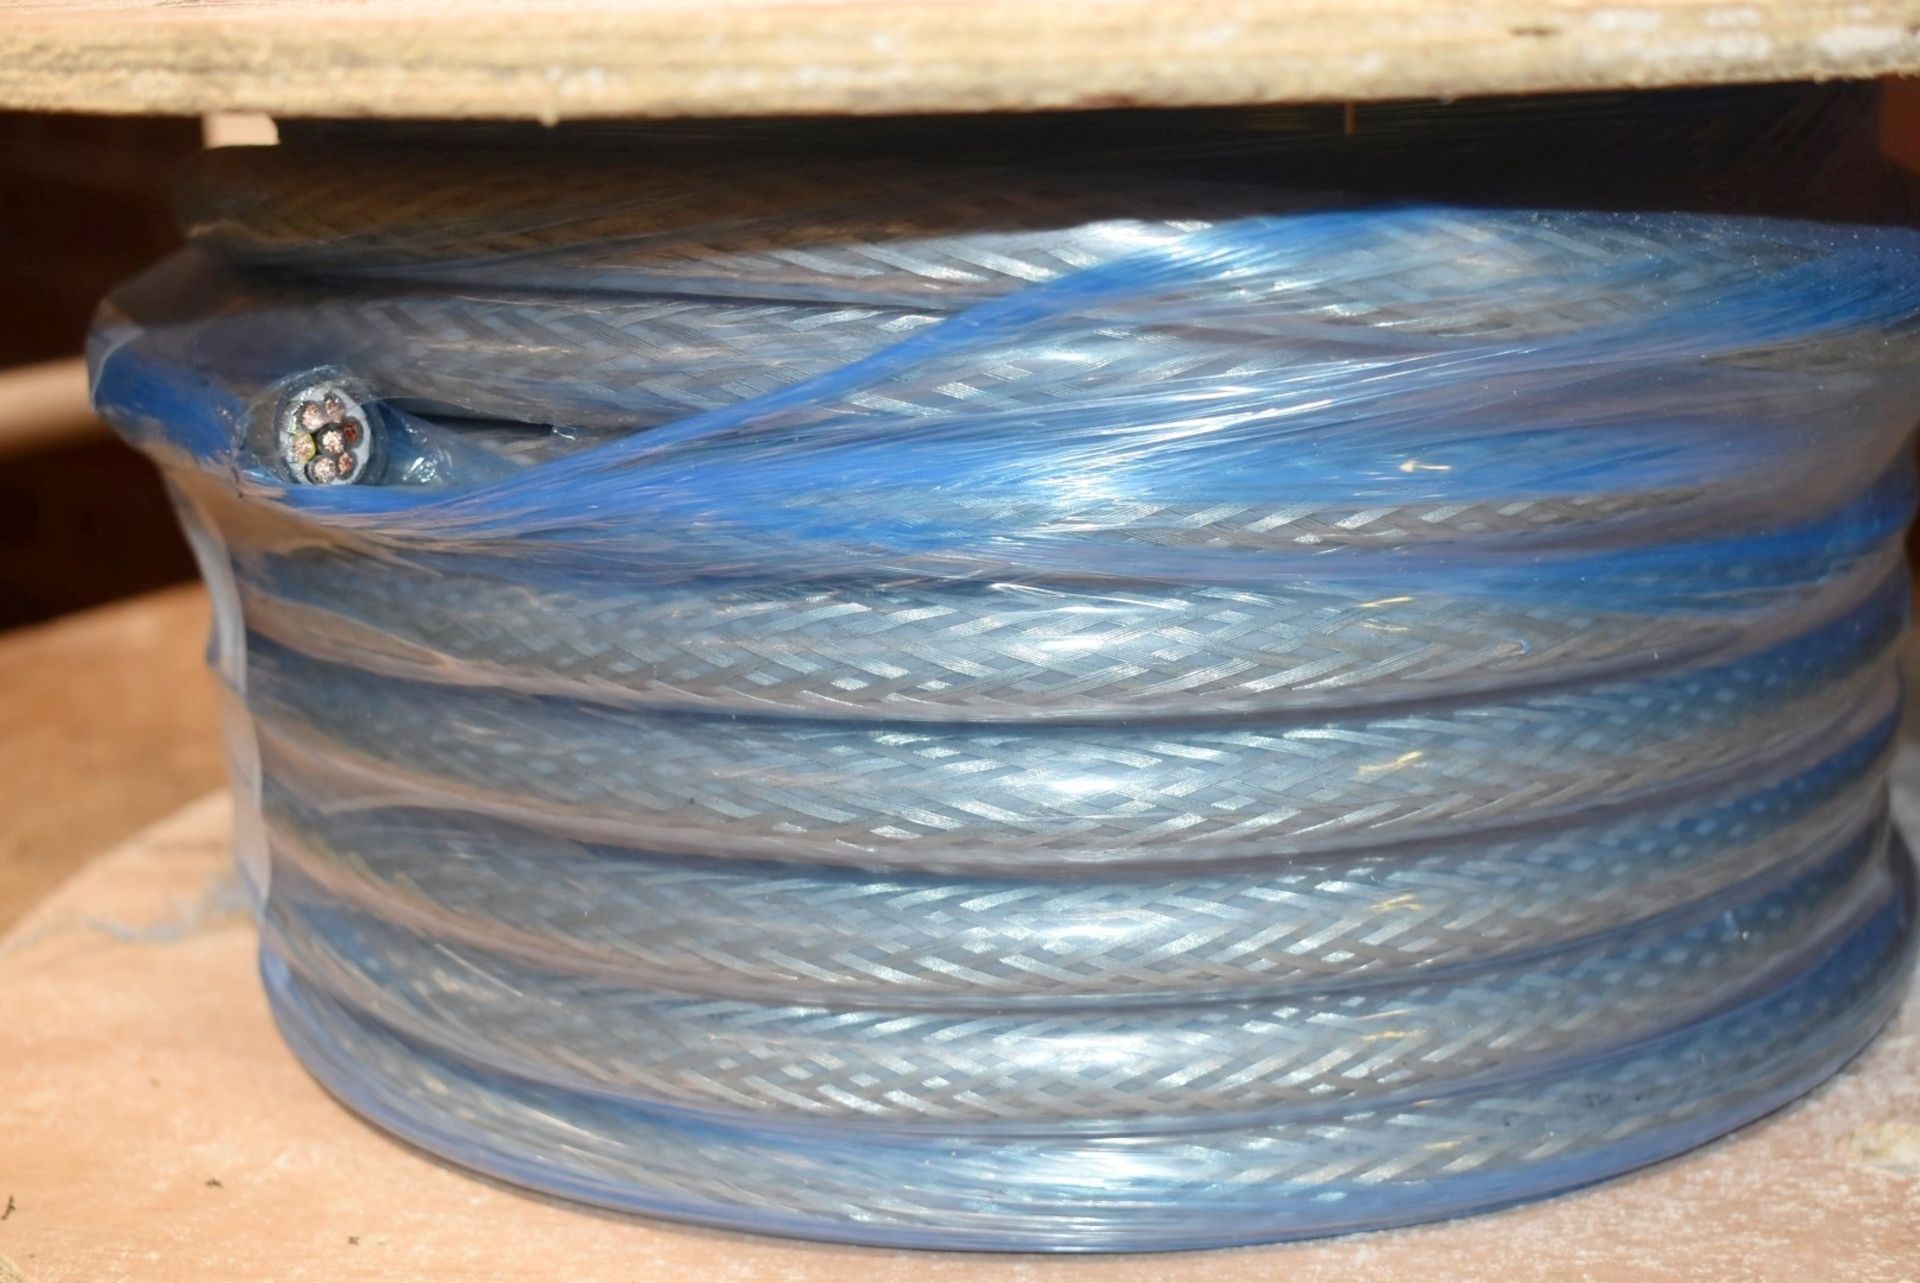 1 x Reel of SYNR Armoured Cable by Contrail Cables - 25m of Unused 7x4 Cable - Image 3 of 4